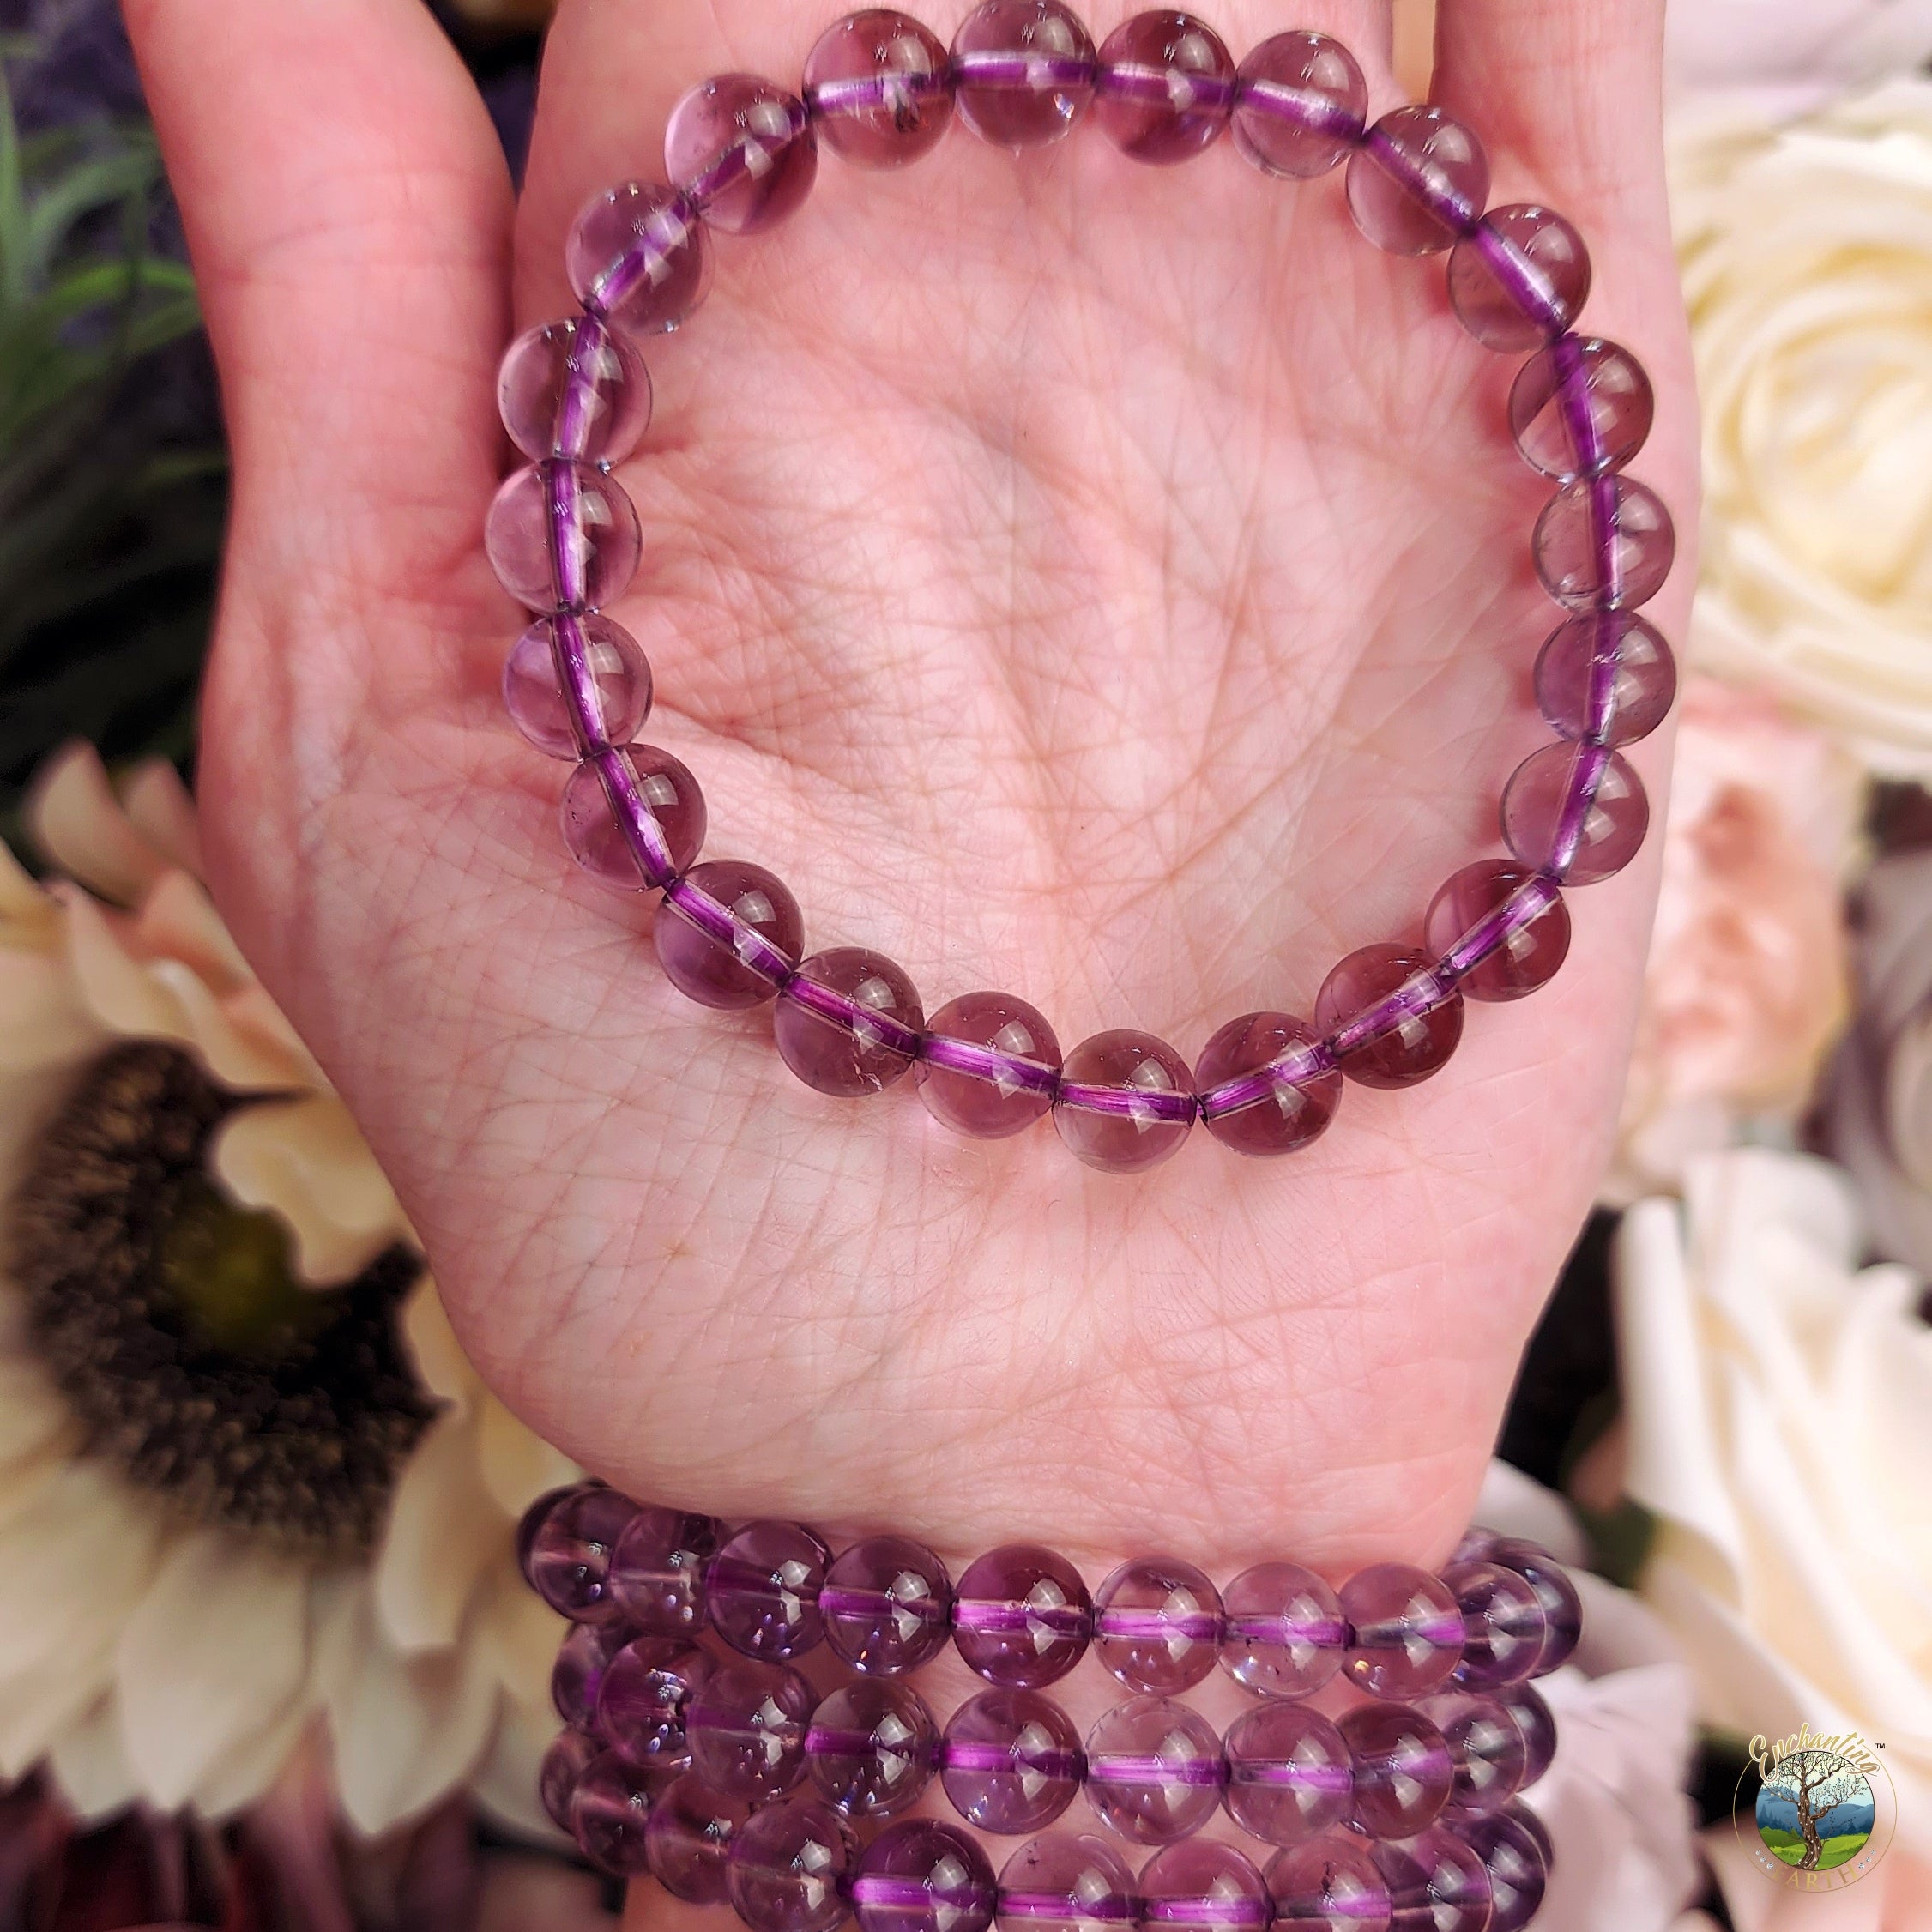 Smokey Amethyst Bracelet (High Quality) for Intuition, Connection with the Divine and Sobriety